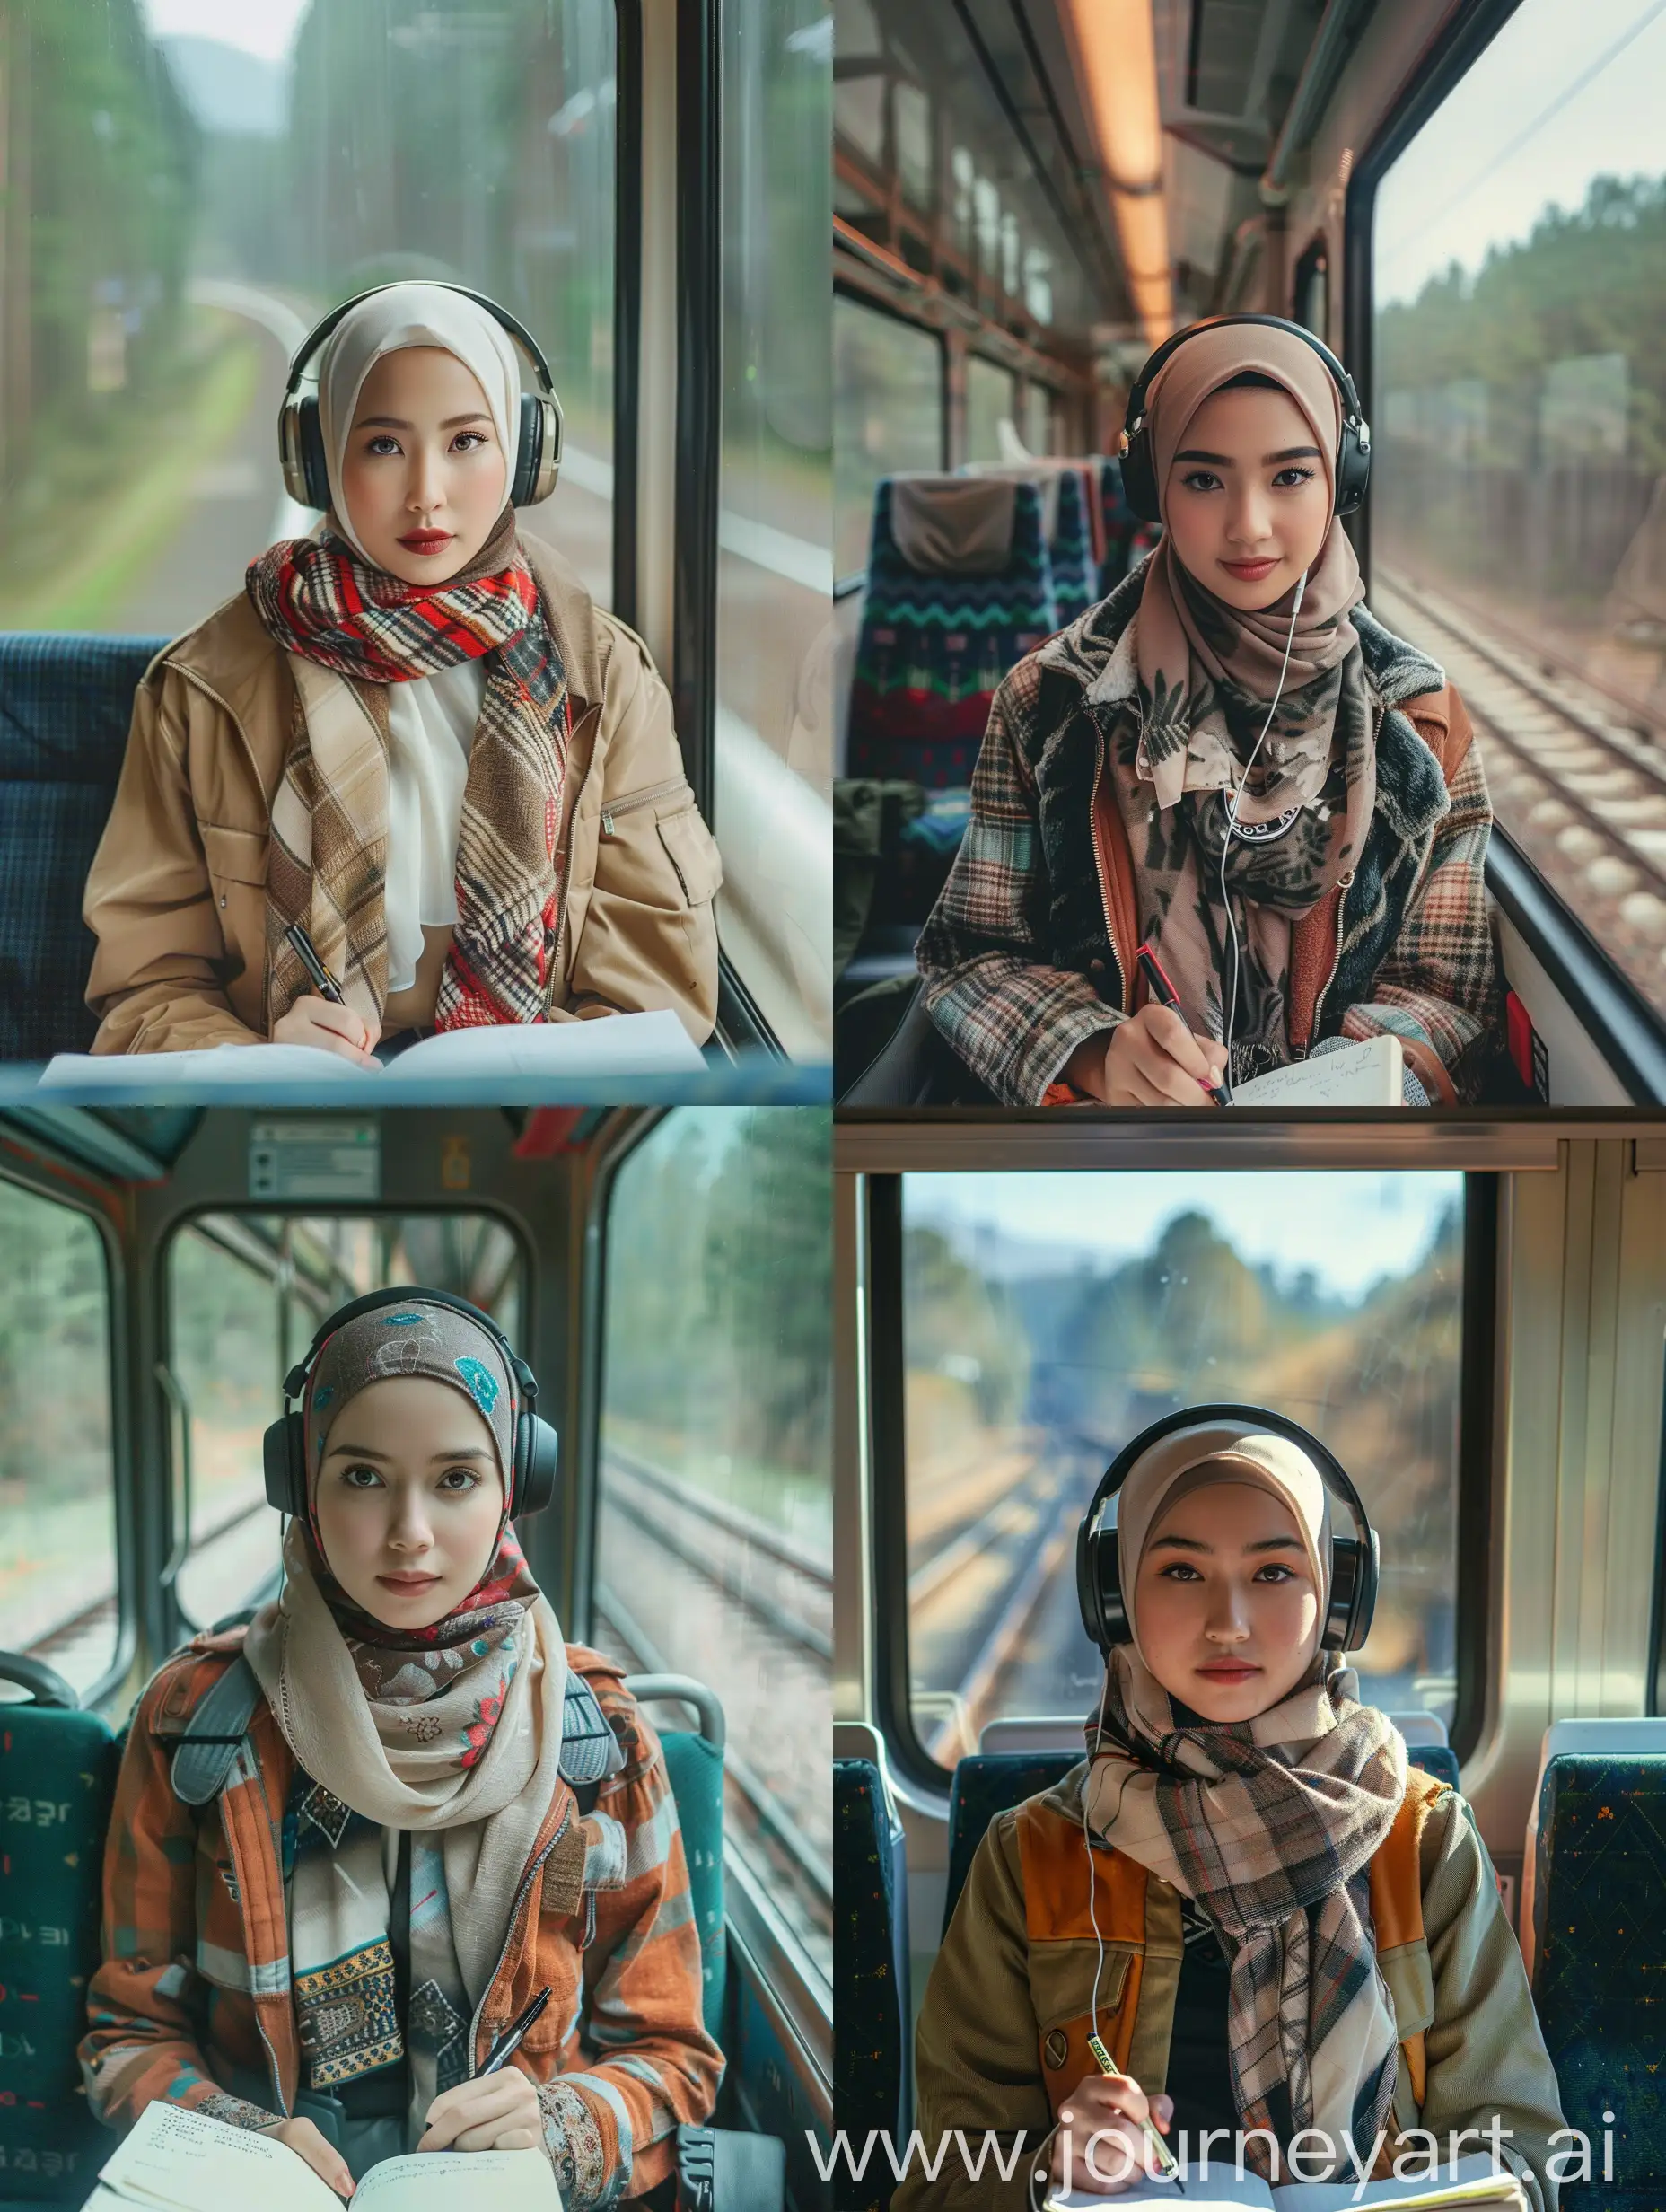 Thai-Muslim-Woman-in-Tranquil-Train-Journey-with-Journal